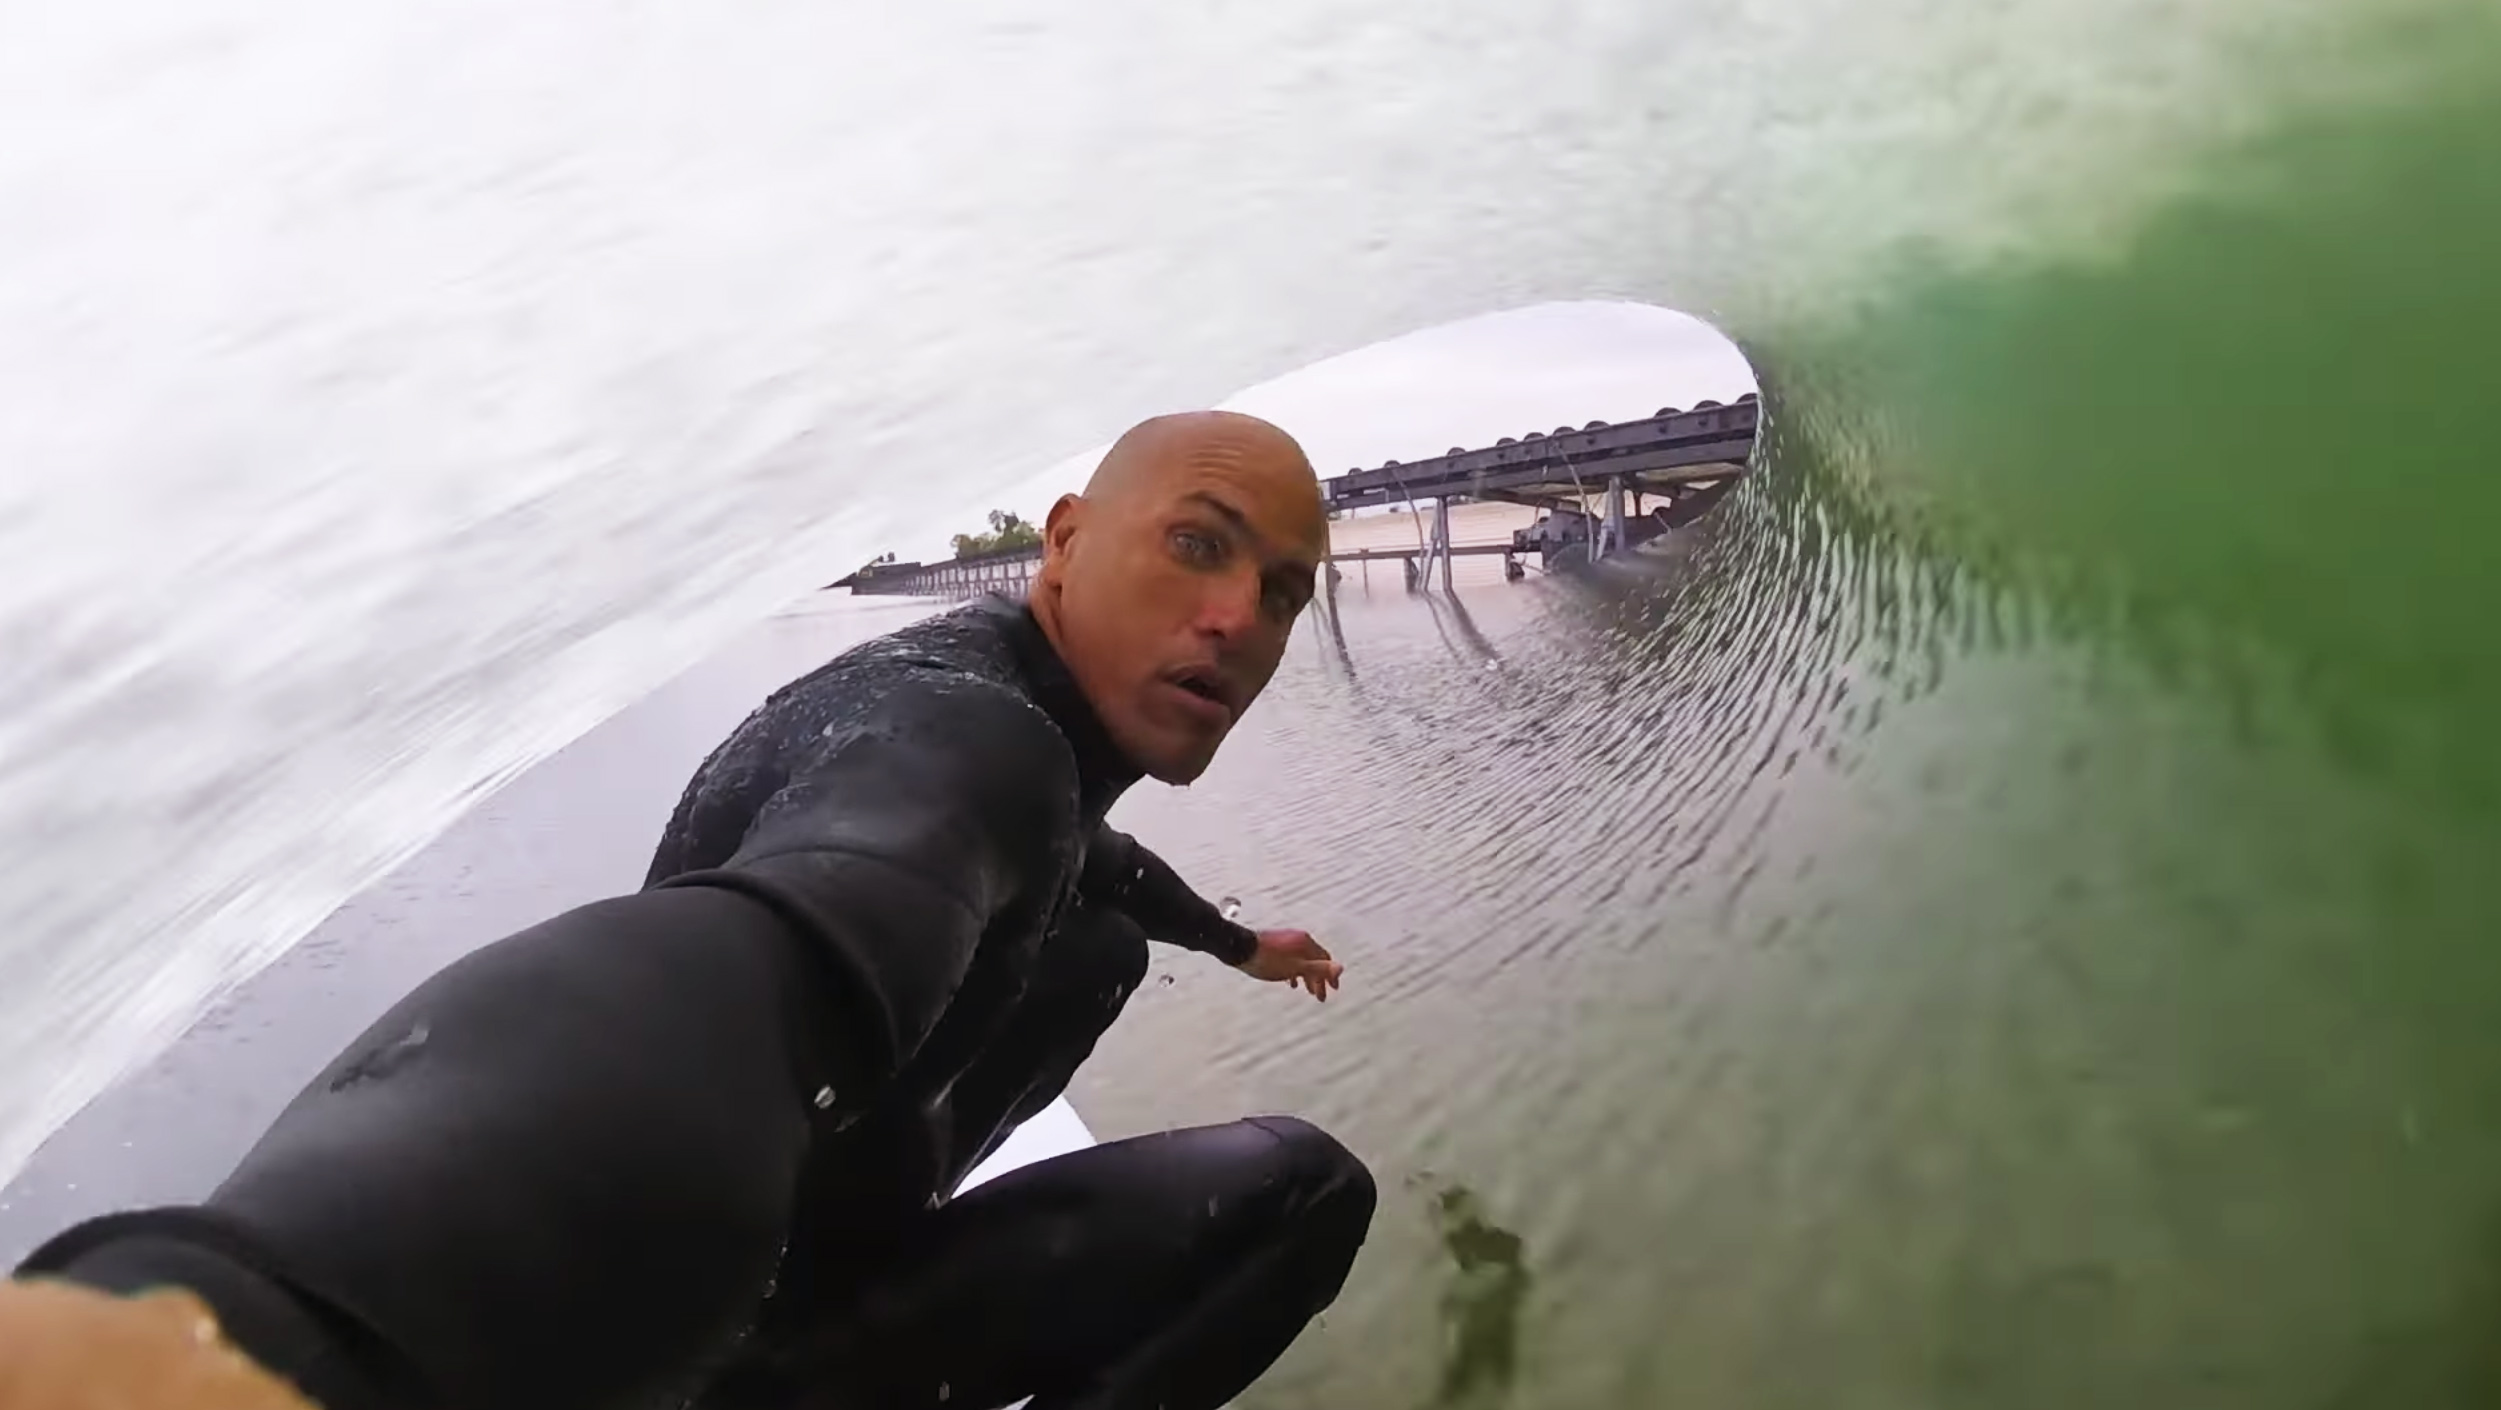 Kelly Slater riding an artificial wave in California